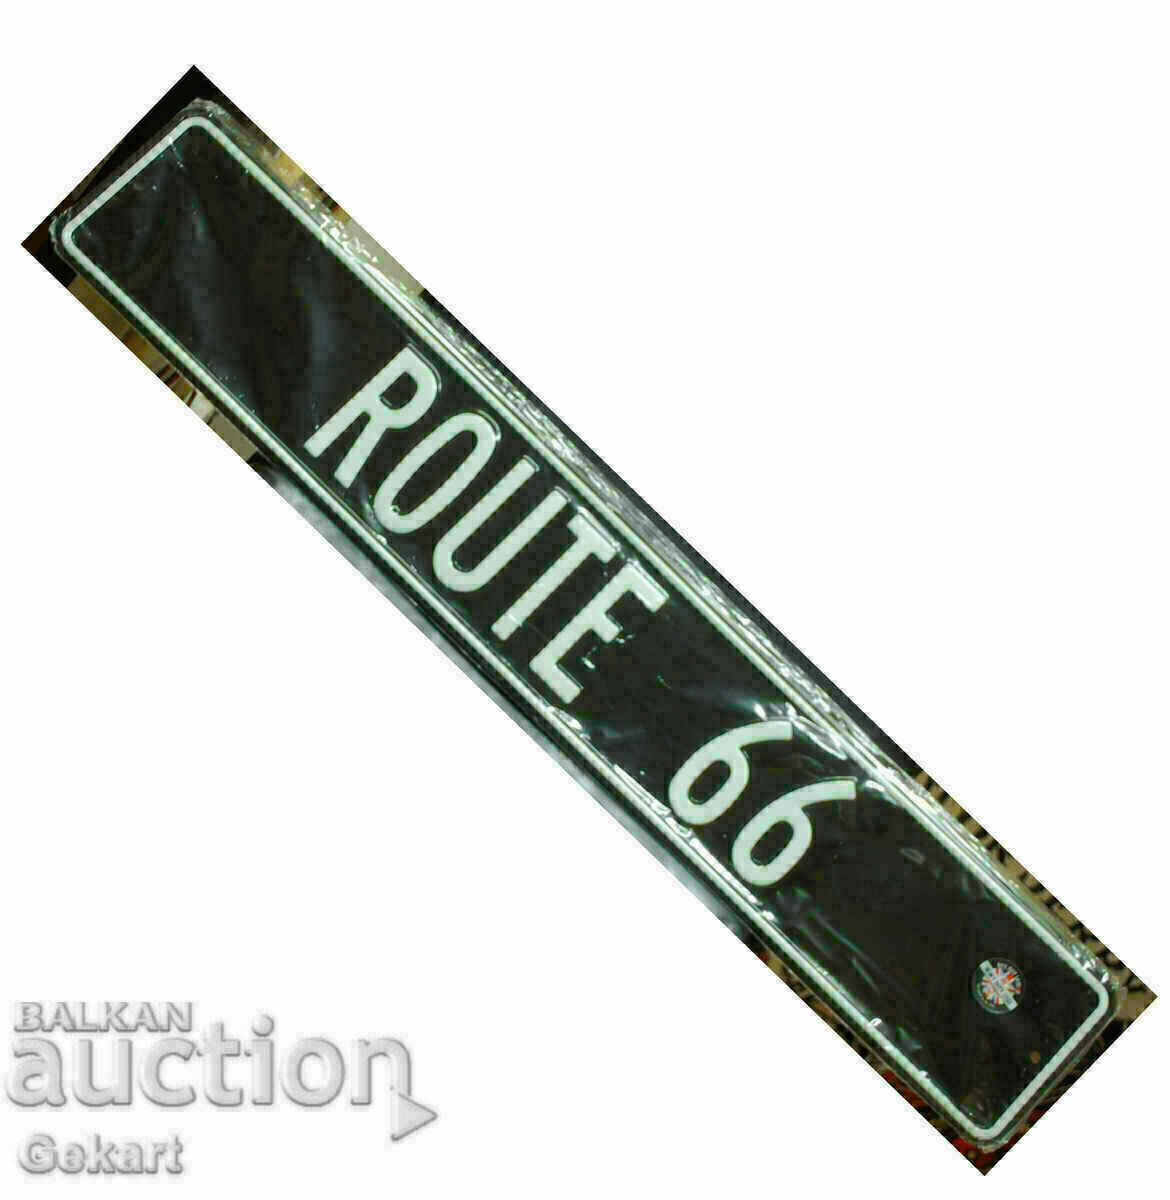 ROUTE 66 Metal Sign